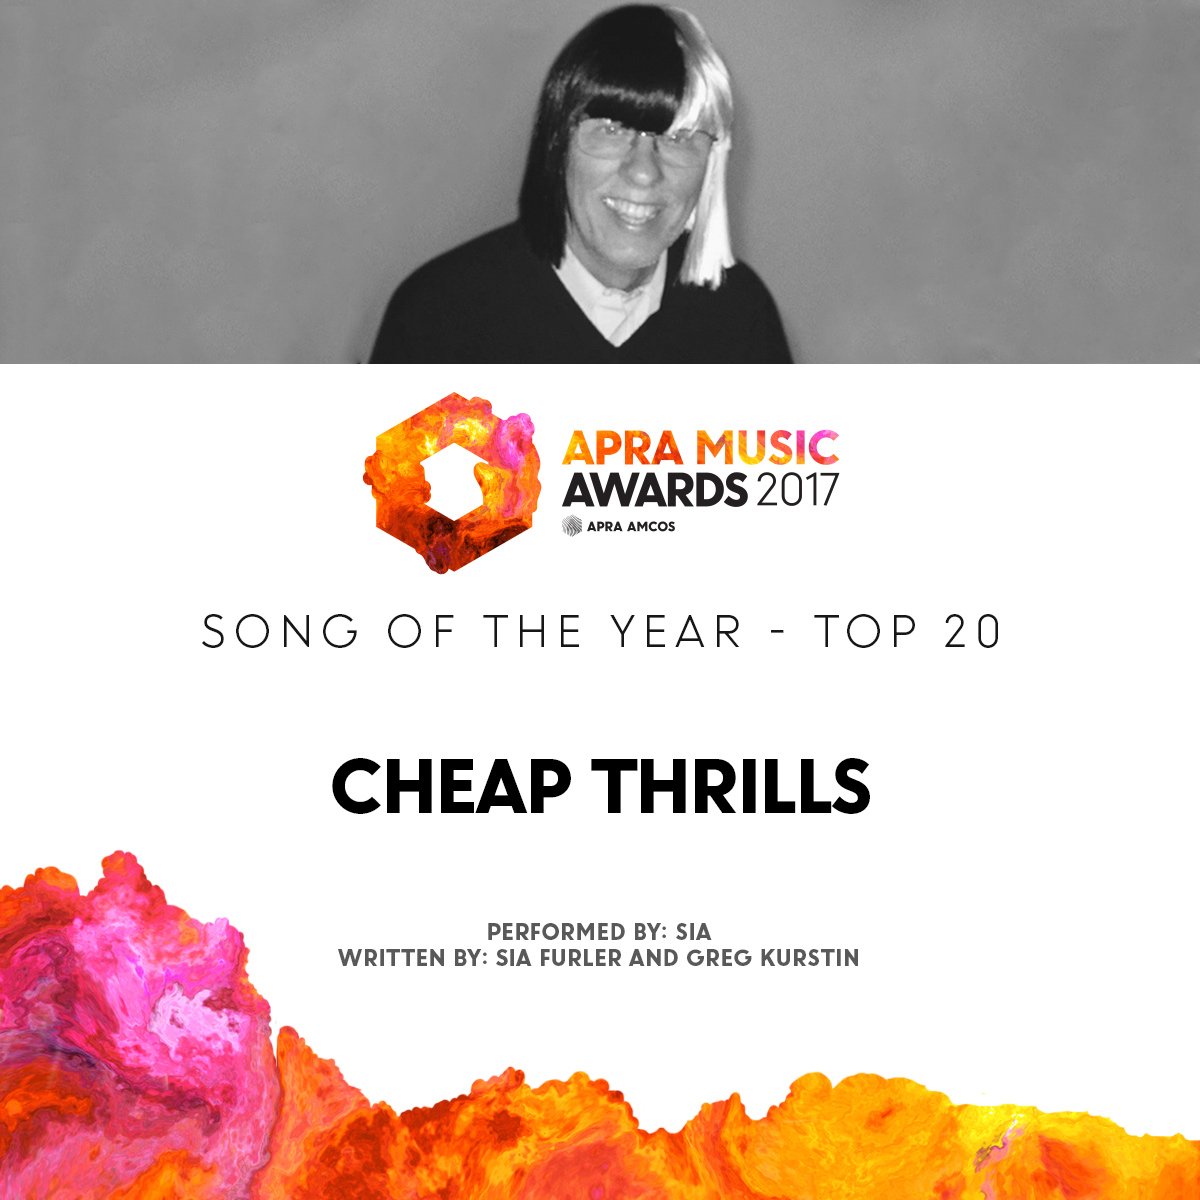 #CheapThrills is shortlisted for Song of the Year at this year's #APRAs! - Team Sia https://t.co/0h5z8BU7mN